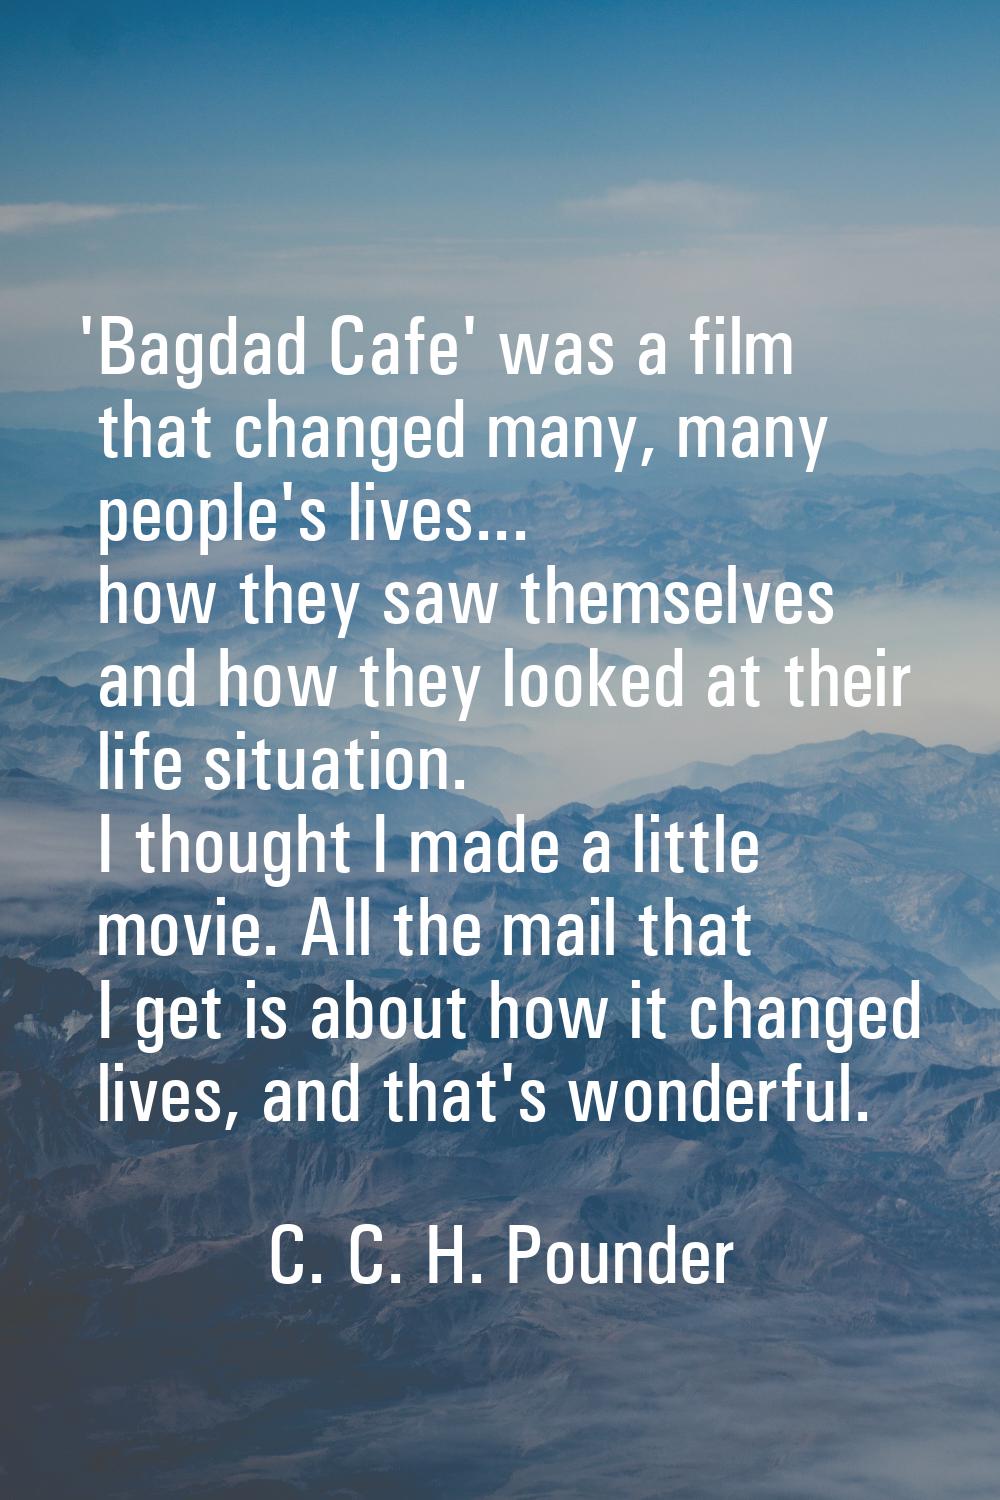 'Bagdad Cafe' was a film that changed many, many people's lives... how they saw themselves and how 